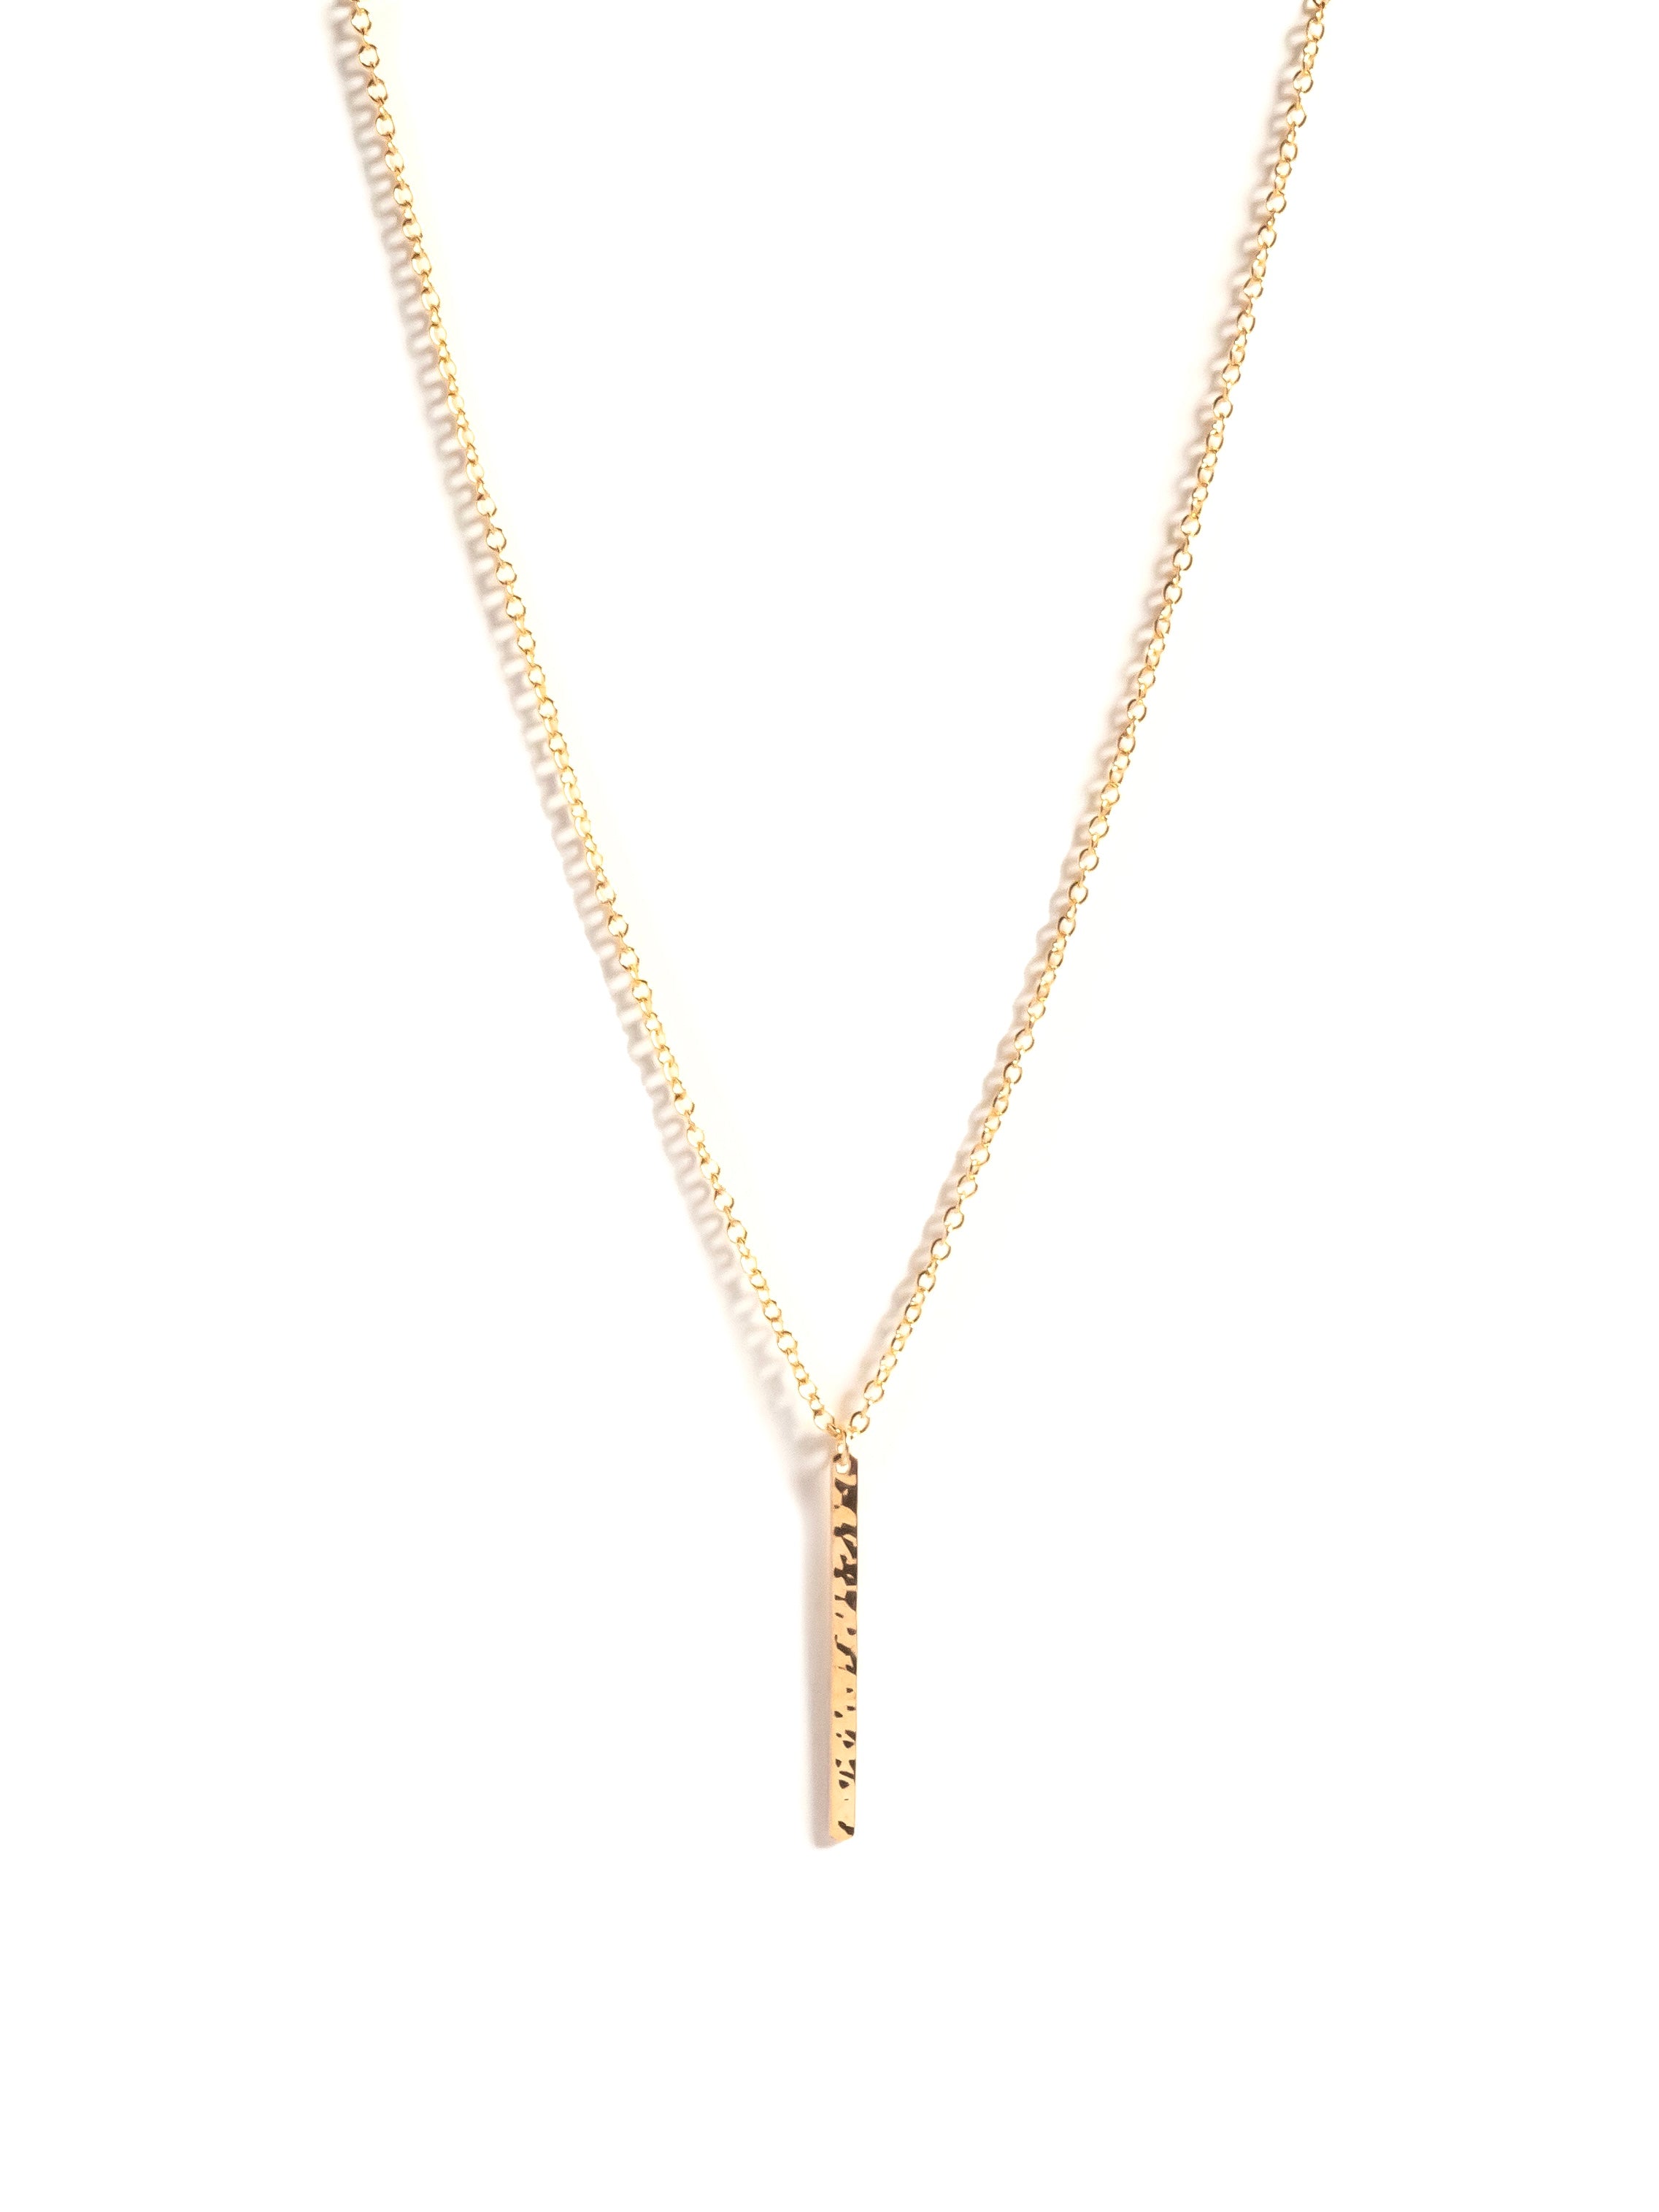 Classic Vertical Zayit Organic Bar Necklace